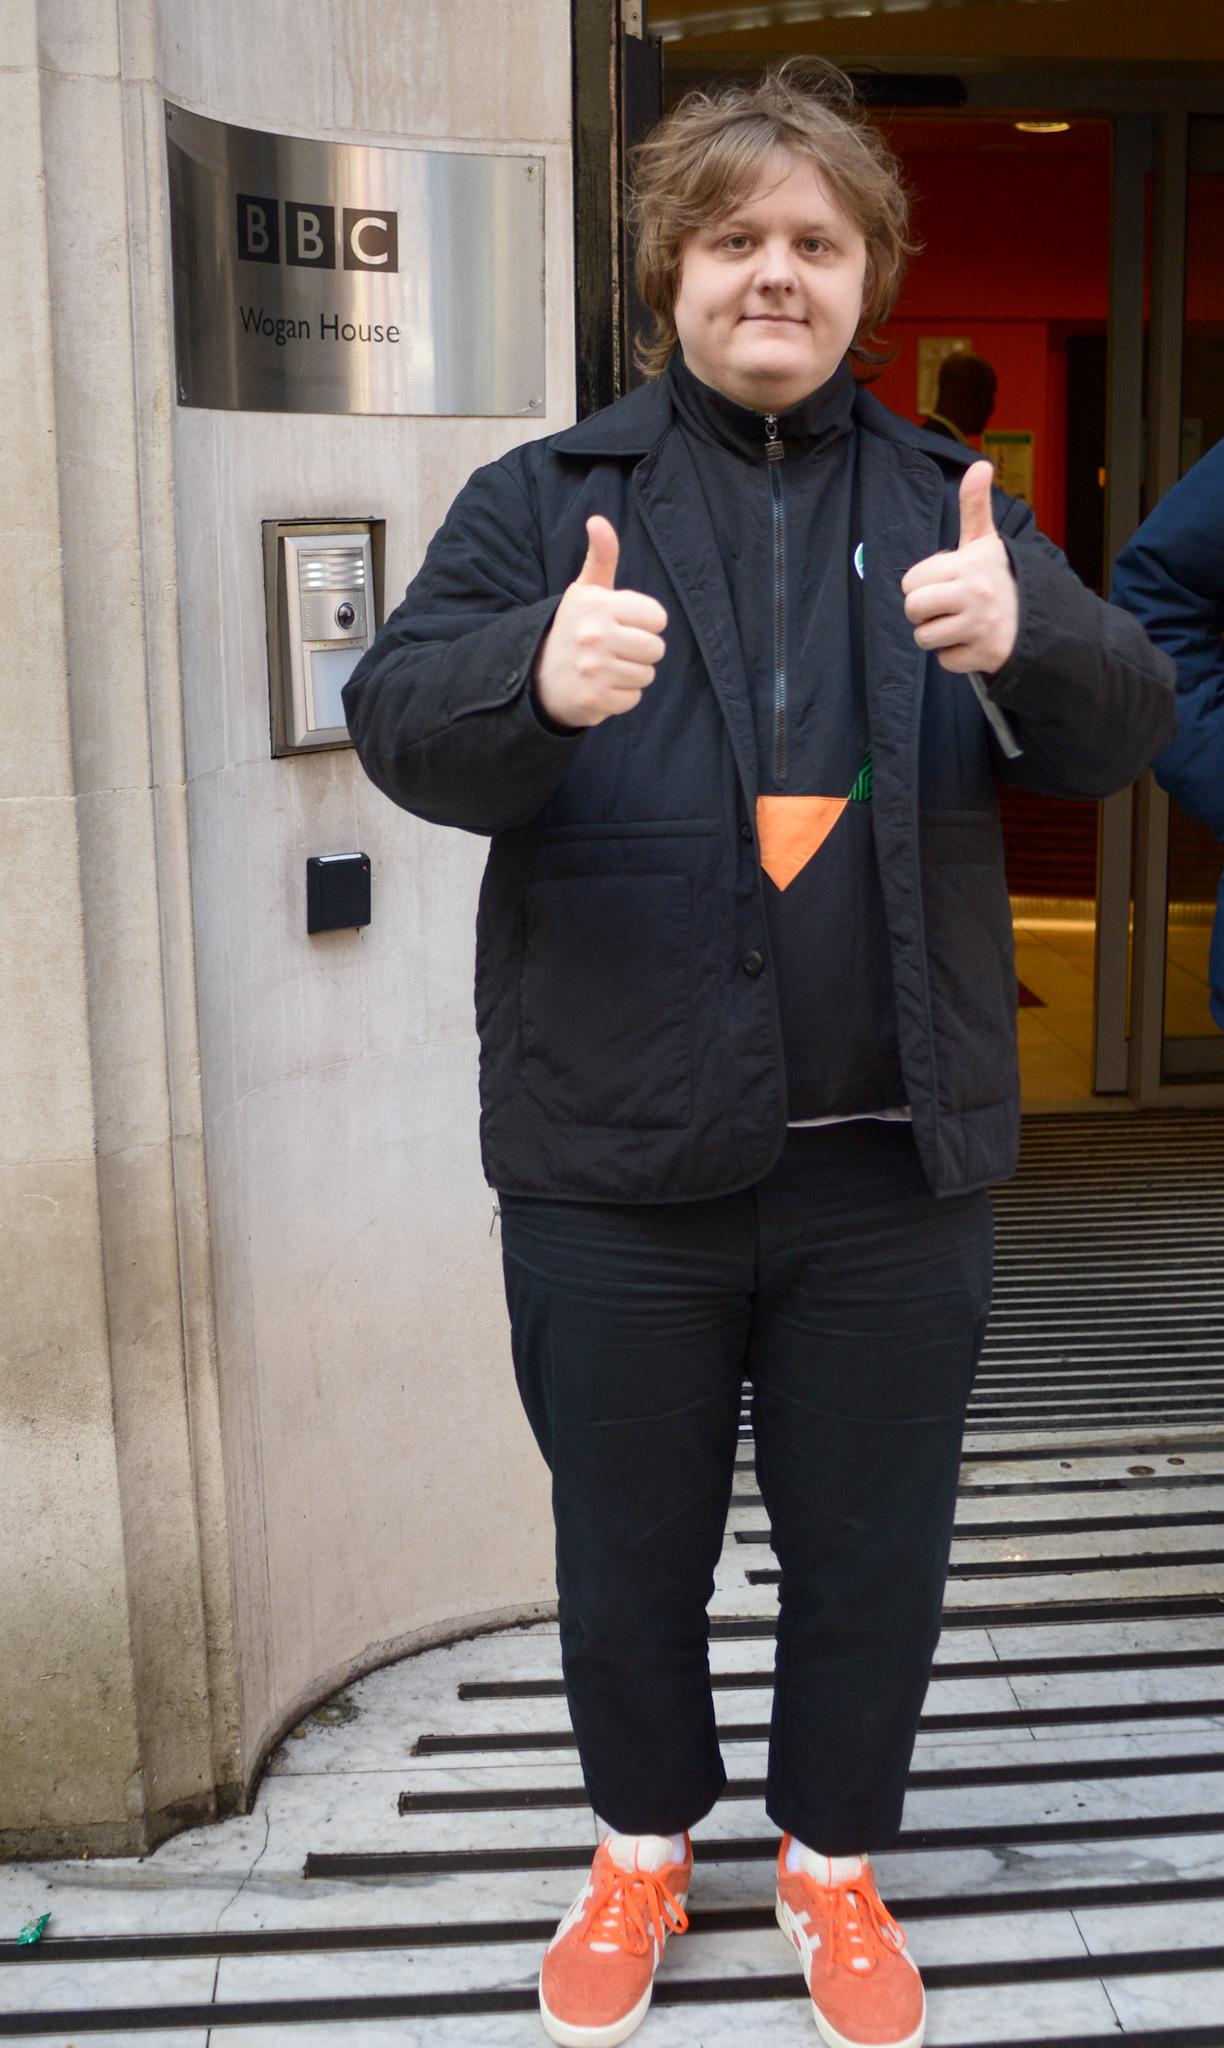 Singer Lewis Capaldi pictured at BBC Radio 2 Studios in London on 24 March 2023